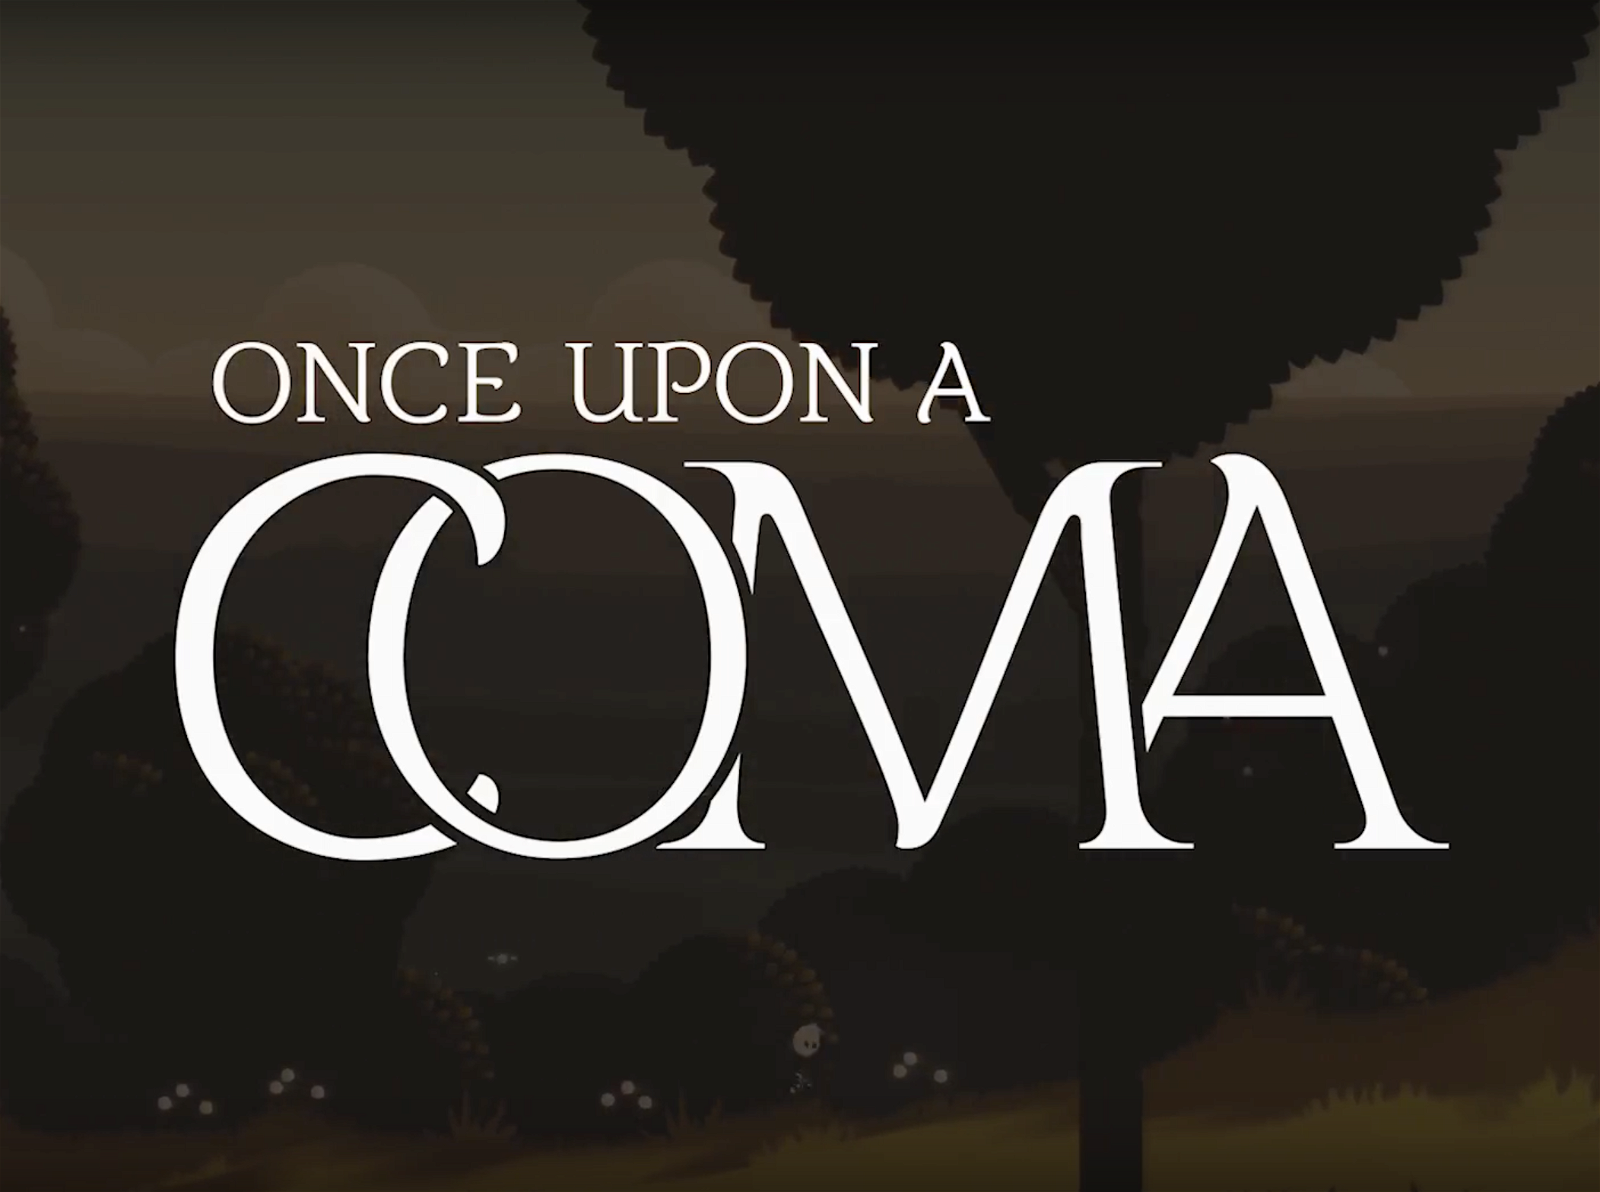 Image of Once Upon a Coma